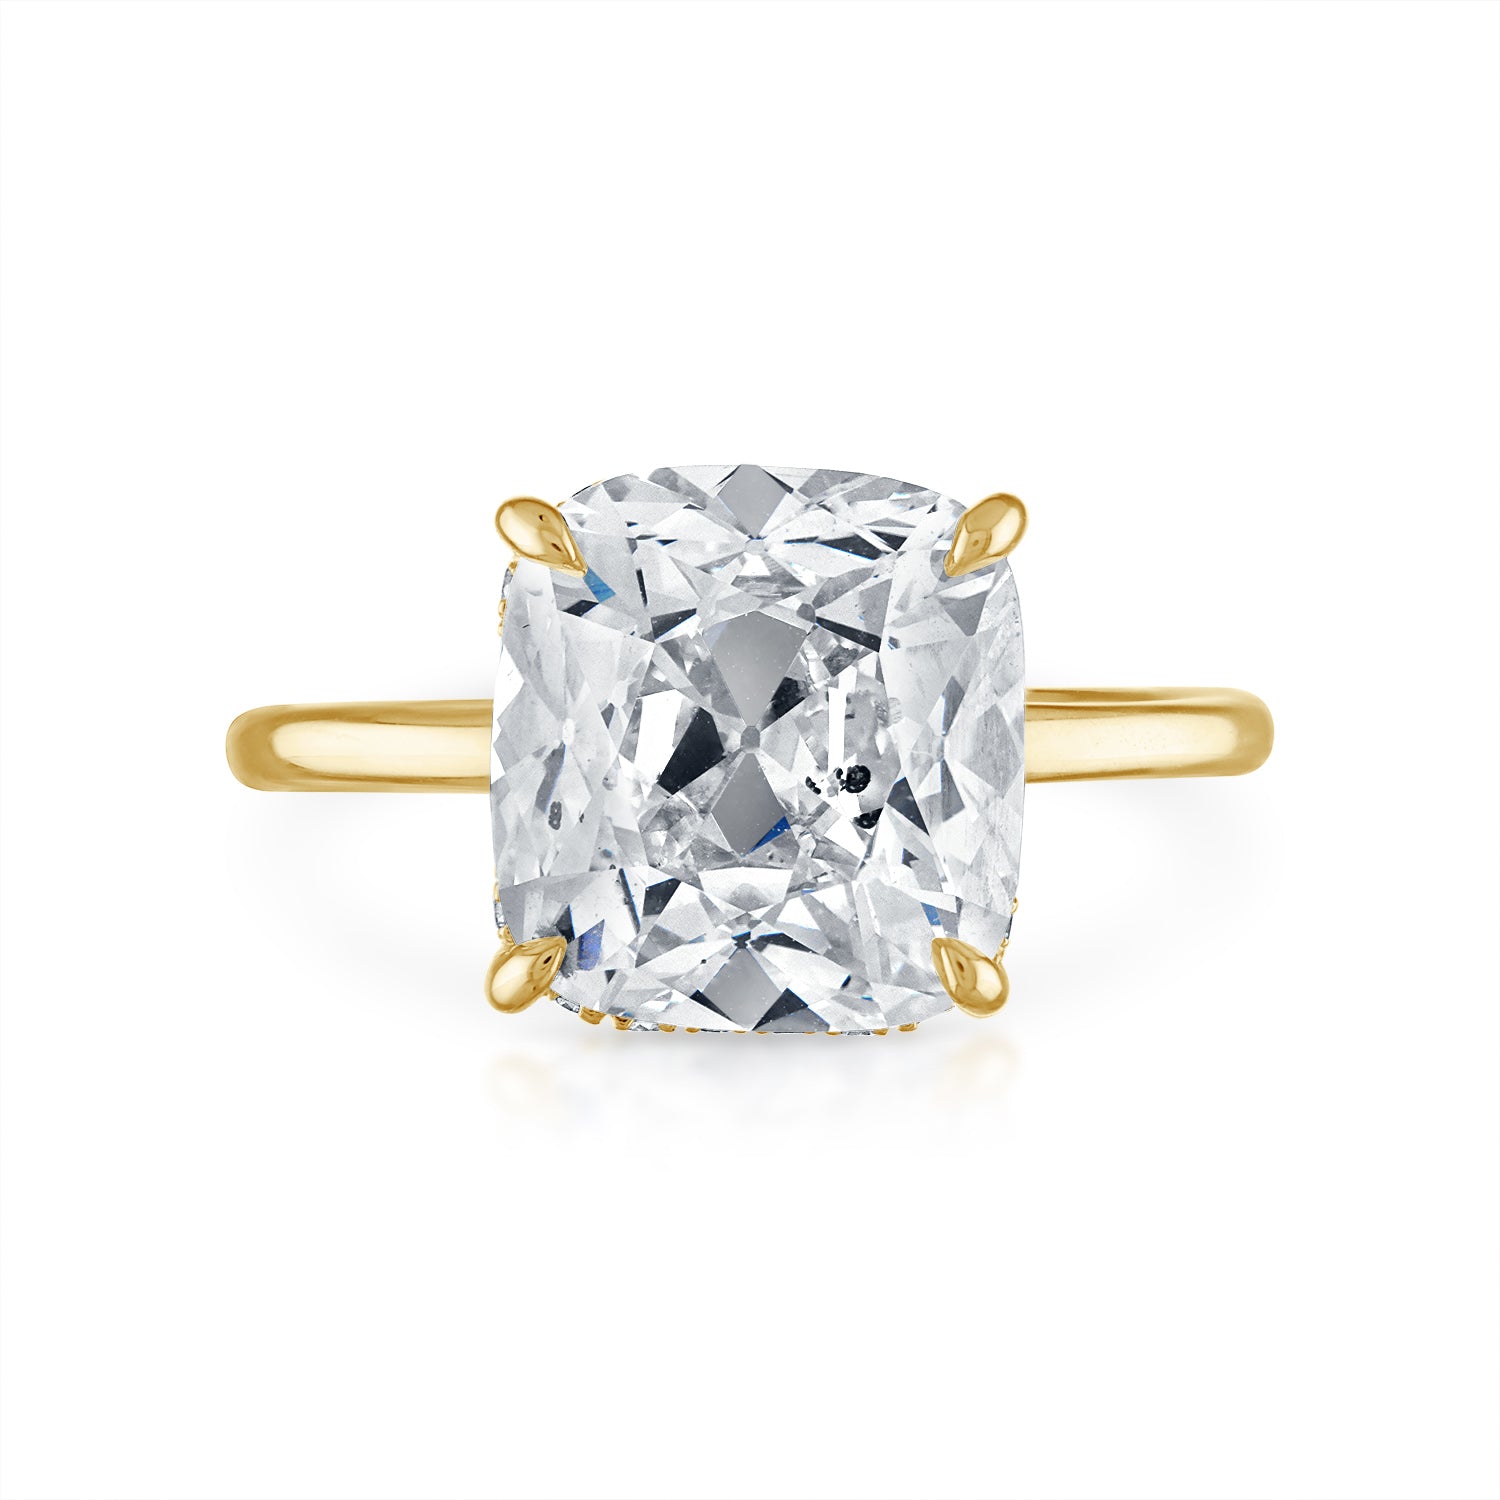 5.01ct Antique Cushion Cut Solitaire with Hidden Halo